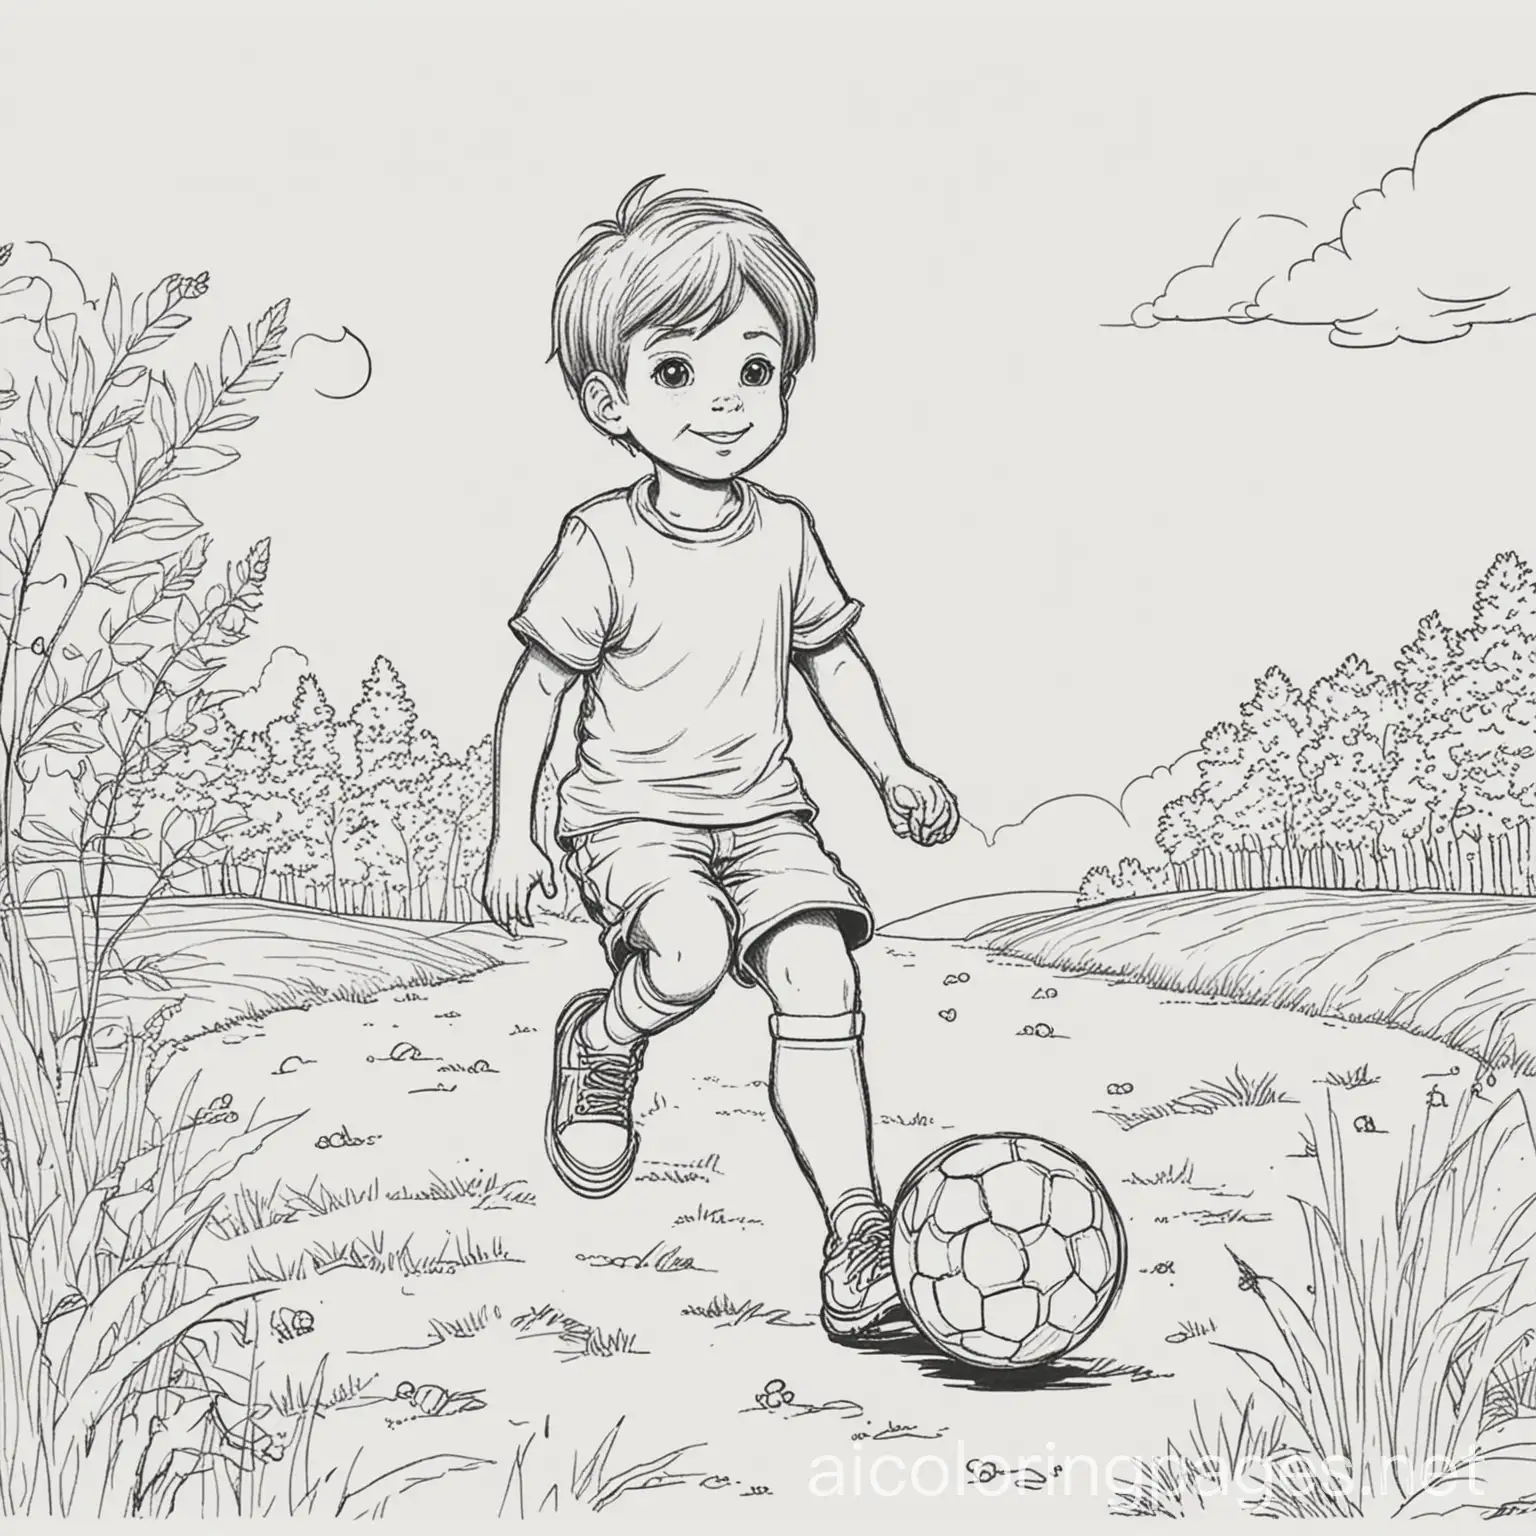 Boy-Playing-Soccer-in-a-Sunlit-Field-Coloring-Page